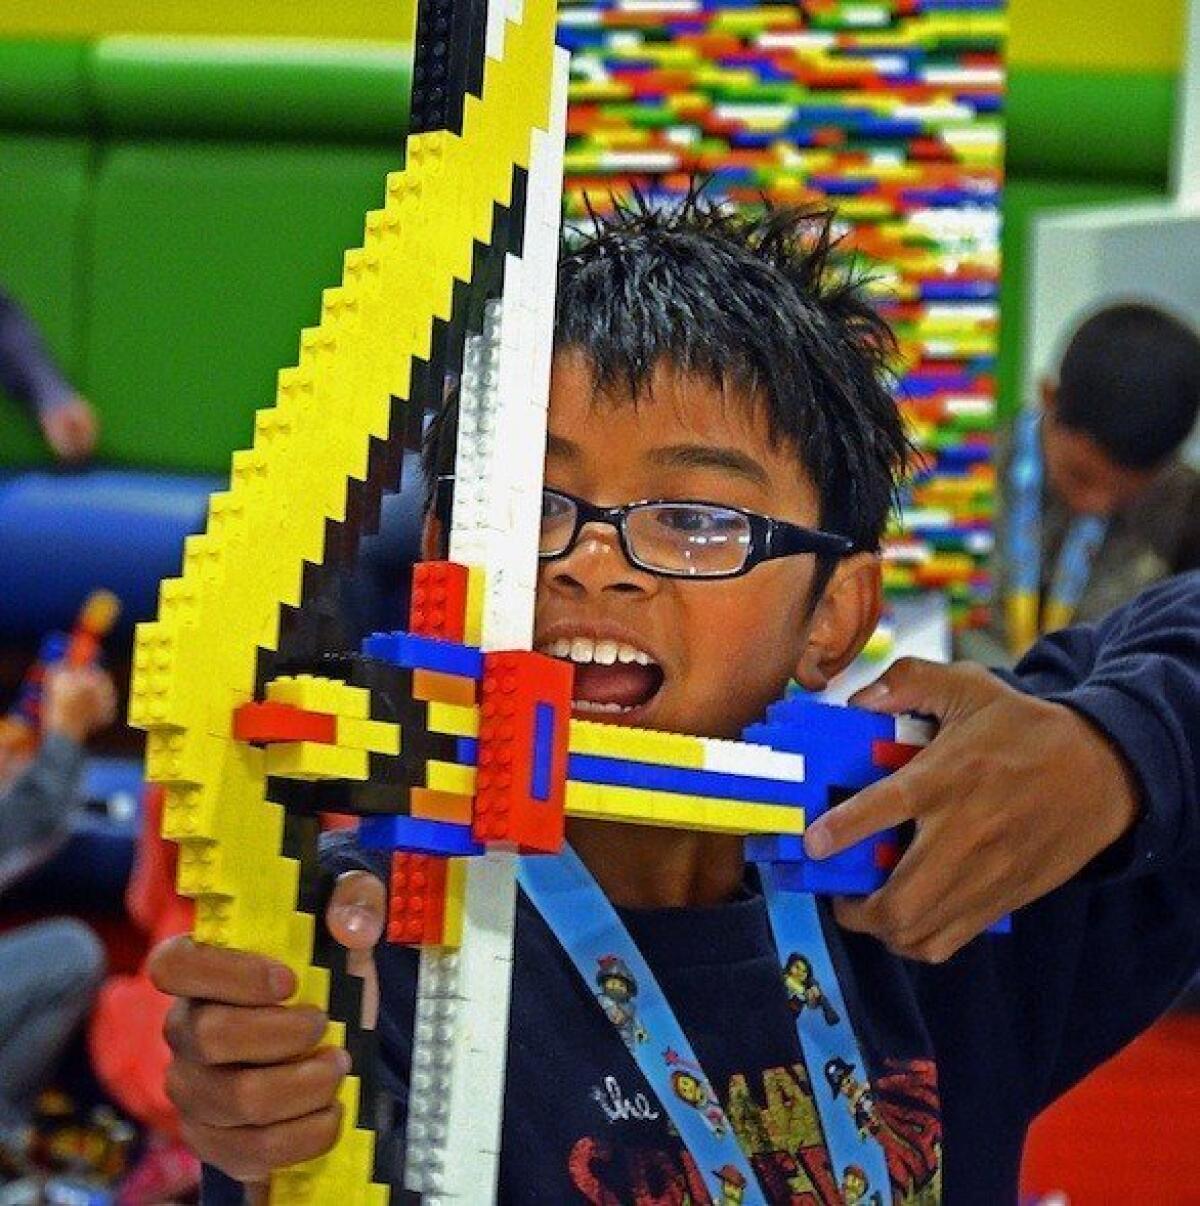 Mason Eugenio, 11, plays with a bow he crafted from Legos at Legoland California in Carlsbad.